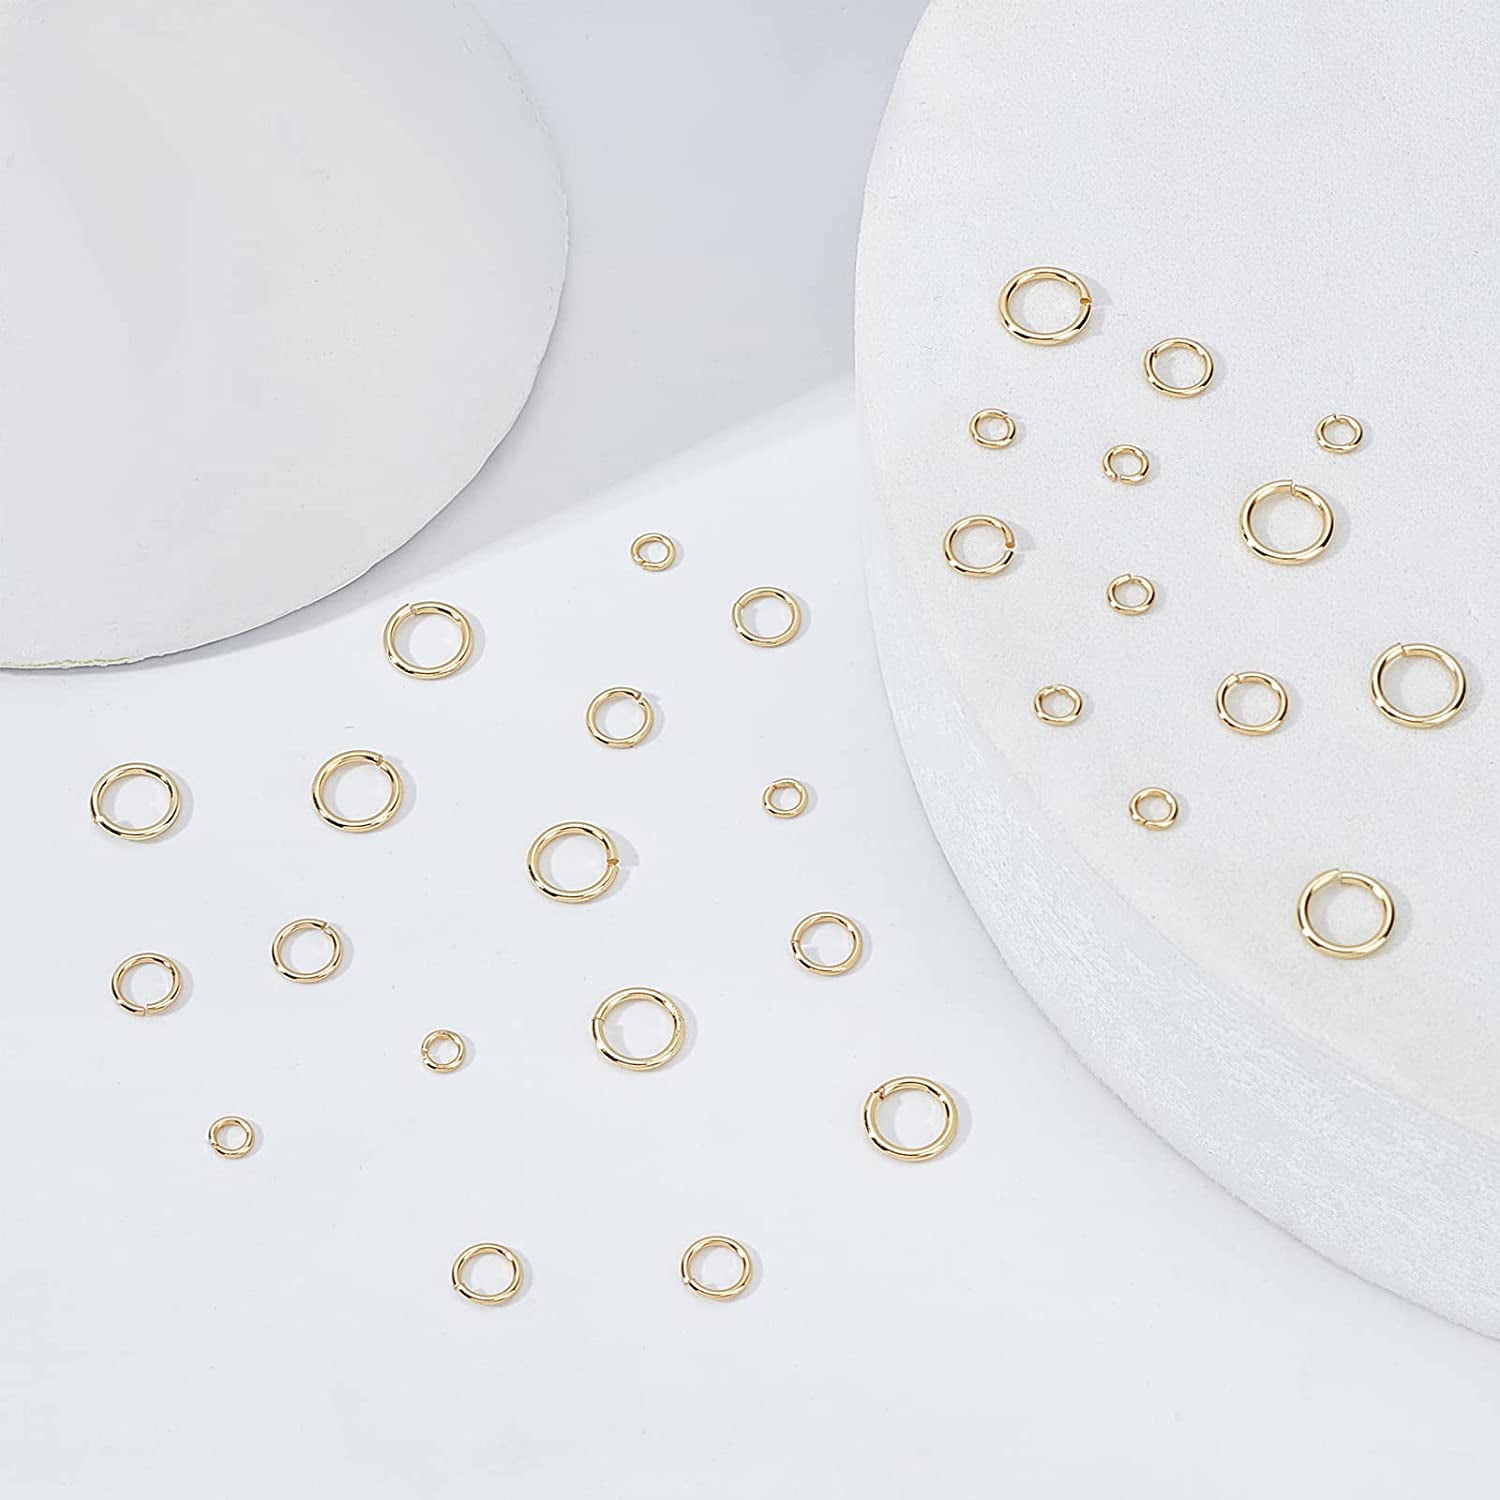 100pcs 14K Gold Filled 4mm Open Jump Rings 22ga, Made in USA, GF8 